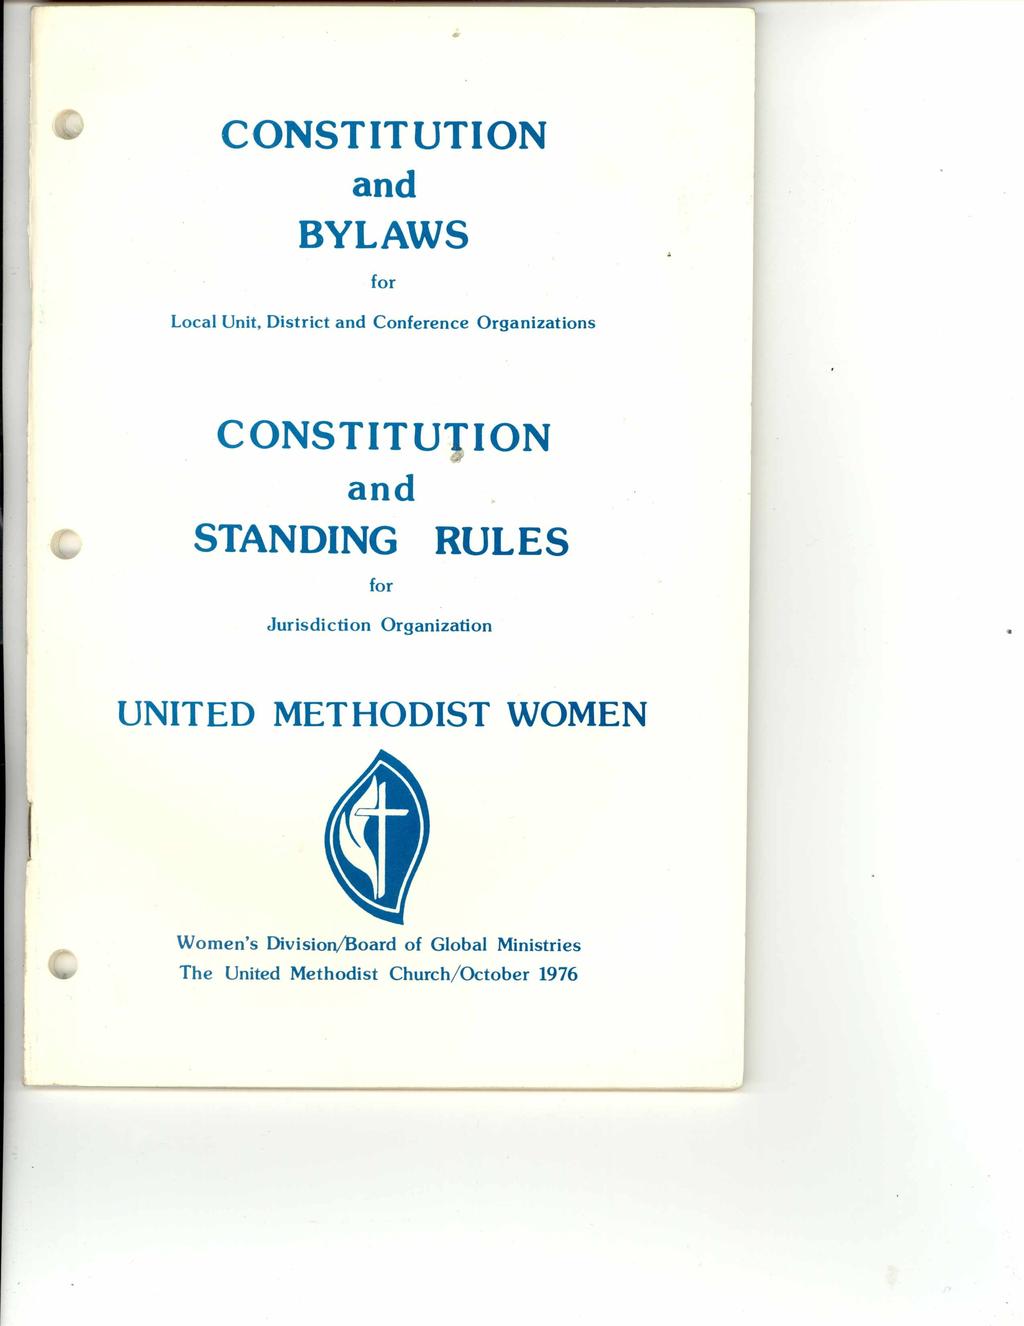 CONSTITUTION and BYLAWS for Local Unit, District and Conference Organizations CONSTITUTION and STANDING RULES for